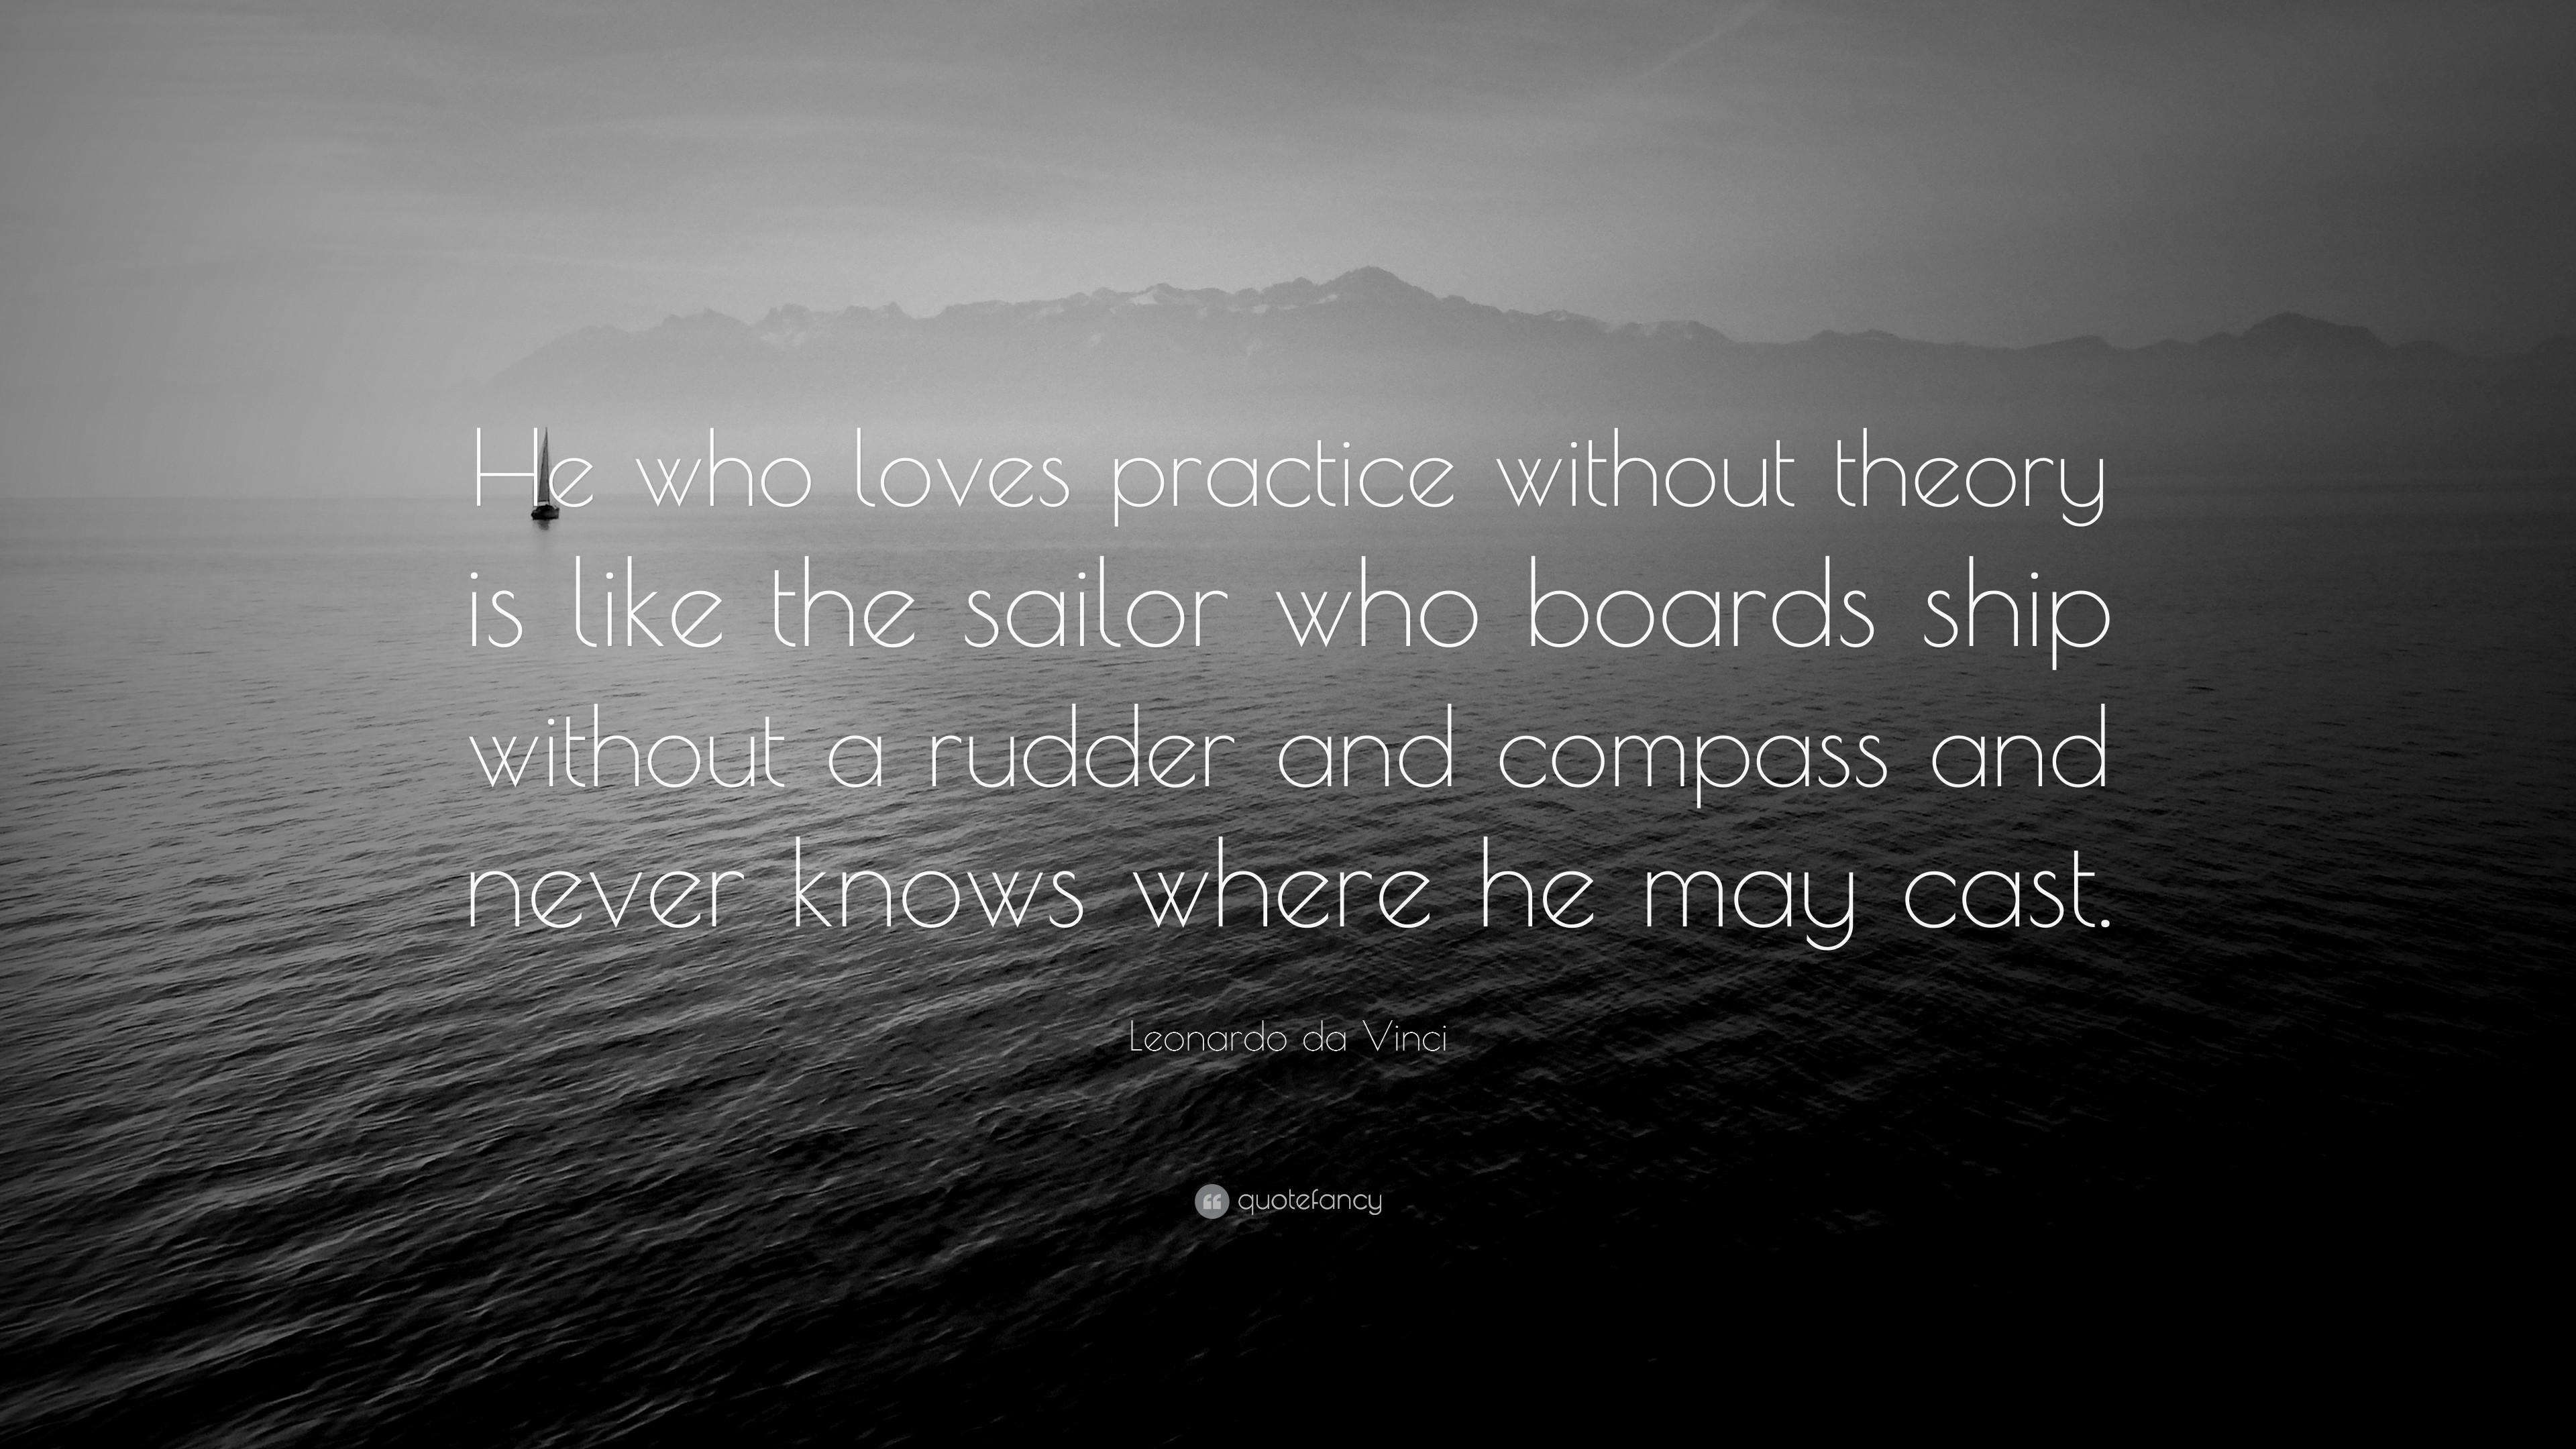 3840x2160 Leonardo da Vinci Quote: “He who loves practice without theory is like the  sailor